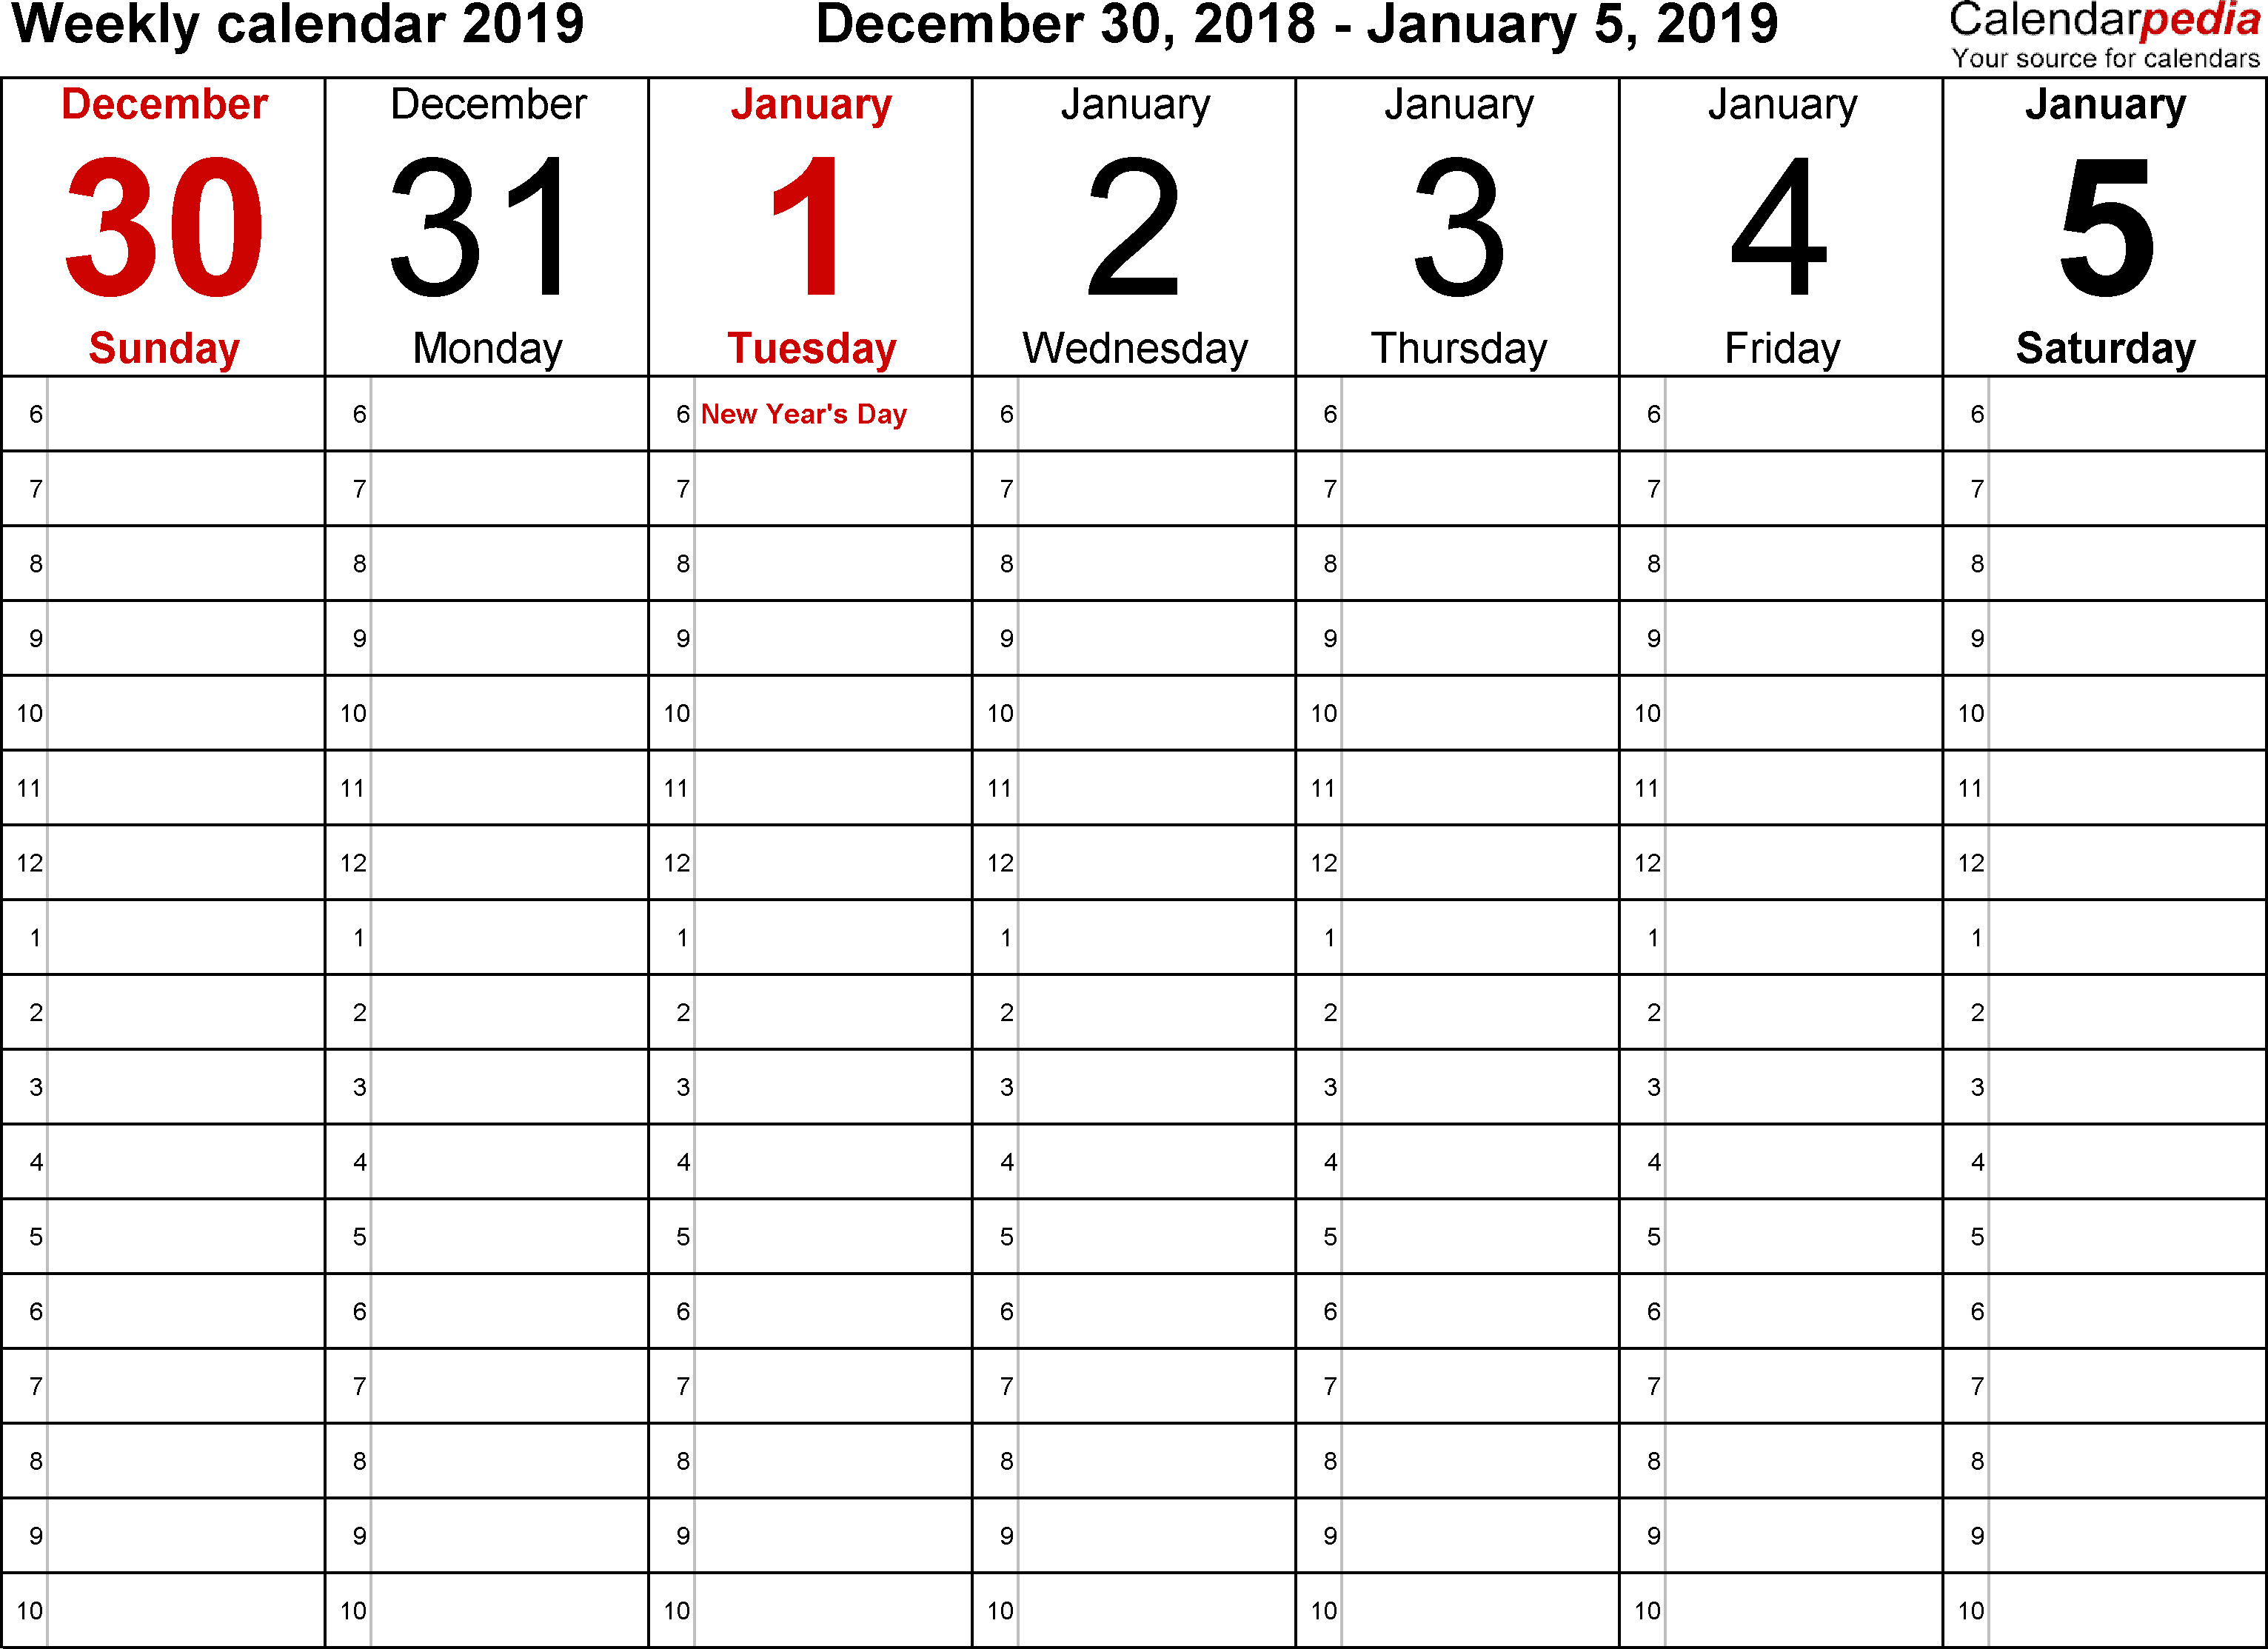 Weekly Calendar 2019 For Word - 12 Free Printable Templates